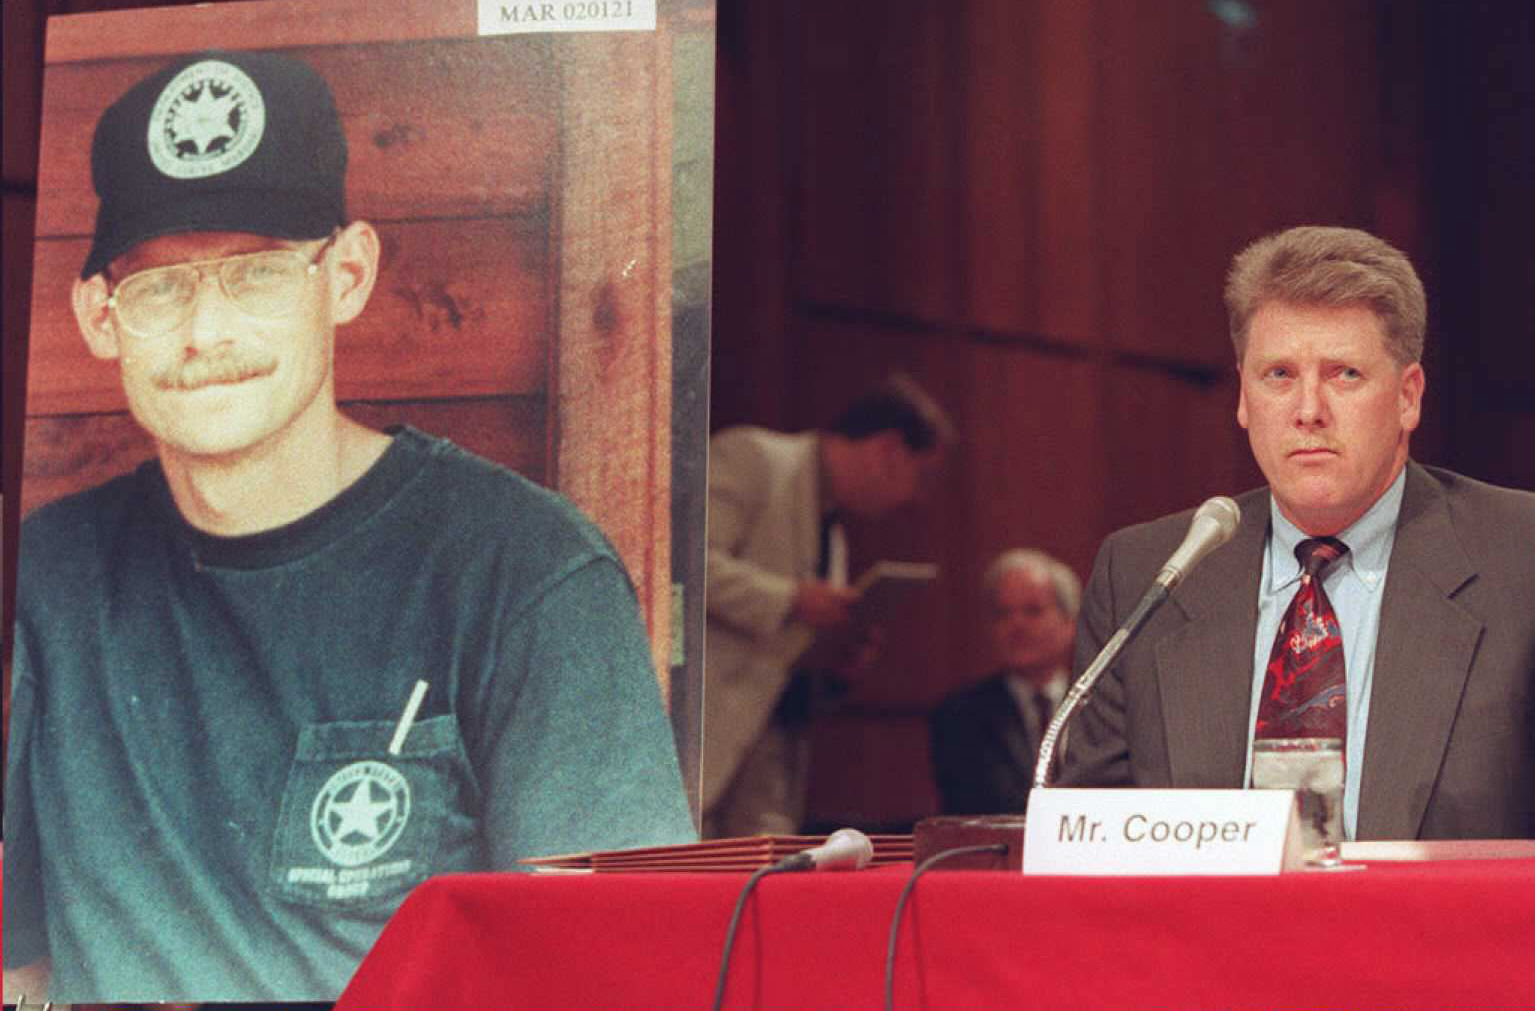 PHOTO: Deputy U.S. Marshal Larry Cooper, right, testifies Sept. 15, 1995, before the Senate subcommittee investigating the FBI siege at Ruby Ridge, Idaho, with a photo of Deputy U.S. Marshal William Degan, who was killed in the shootout, beside him.